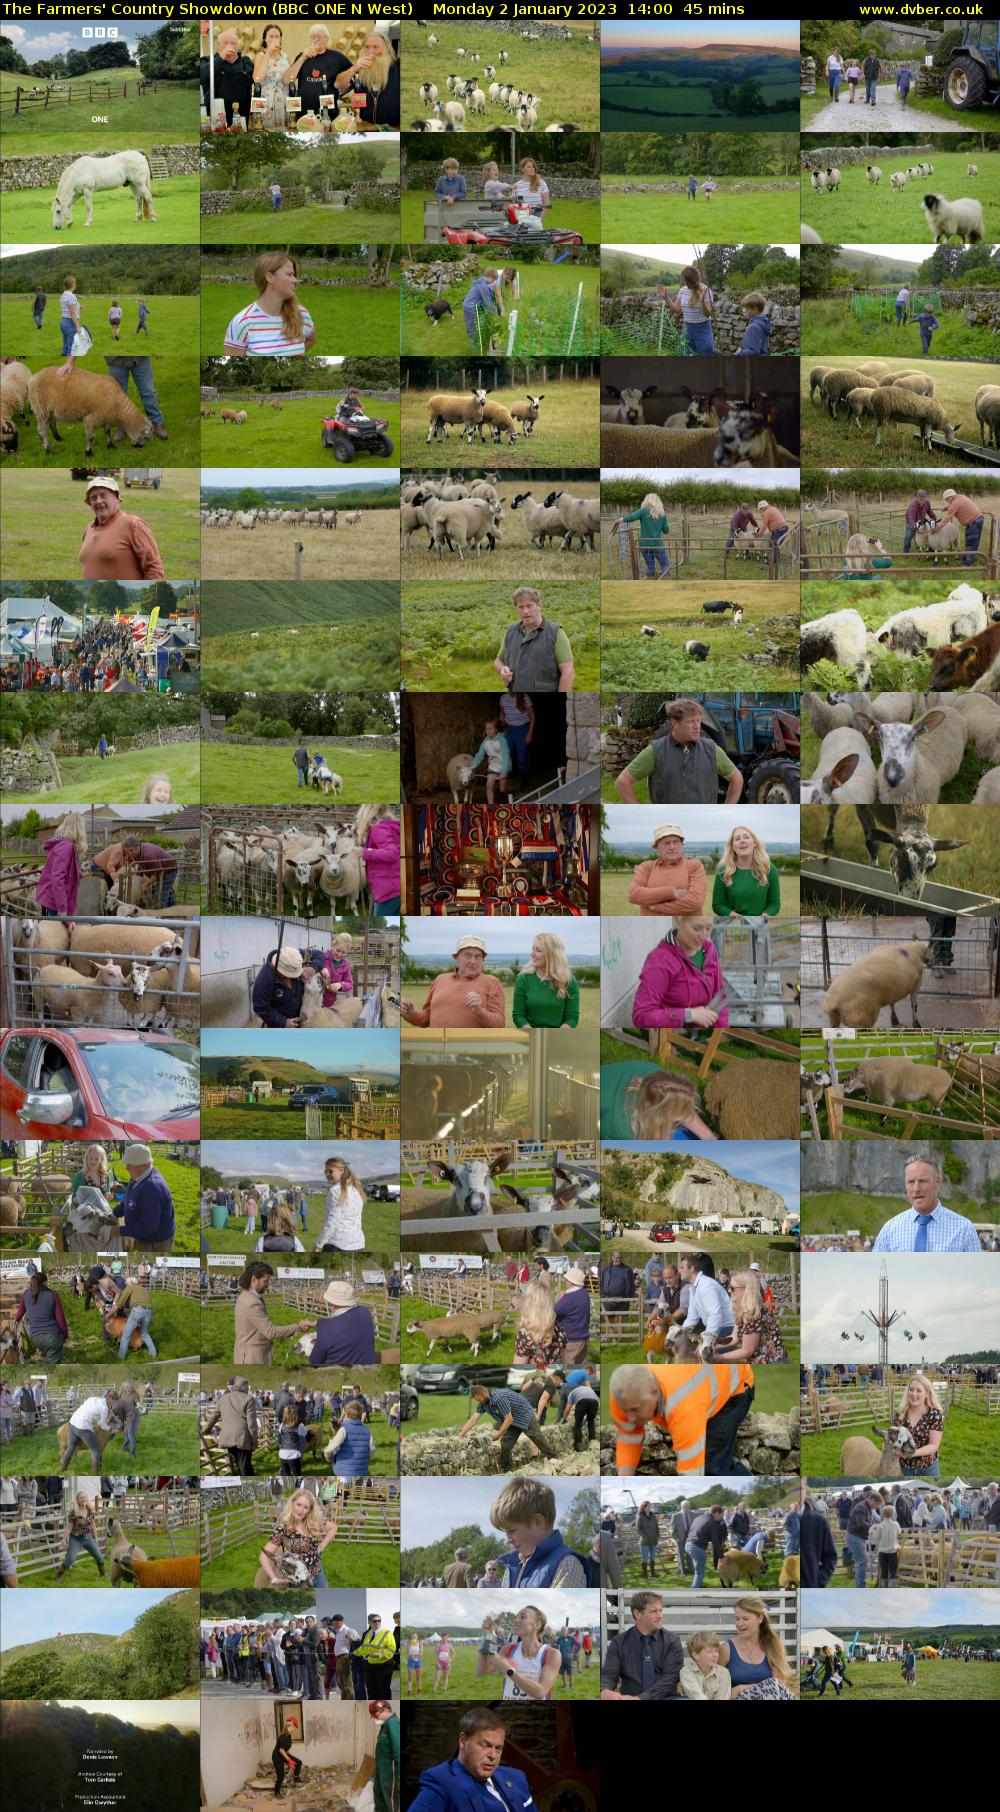 The Farmers' Country Showdown (BBC ONE N West) Monday 2 January 2023 14:00 - 14:45